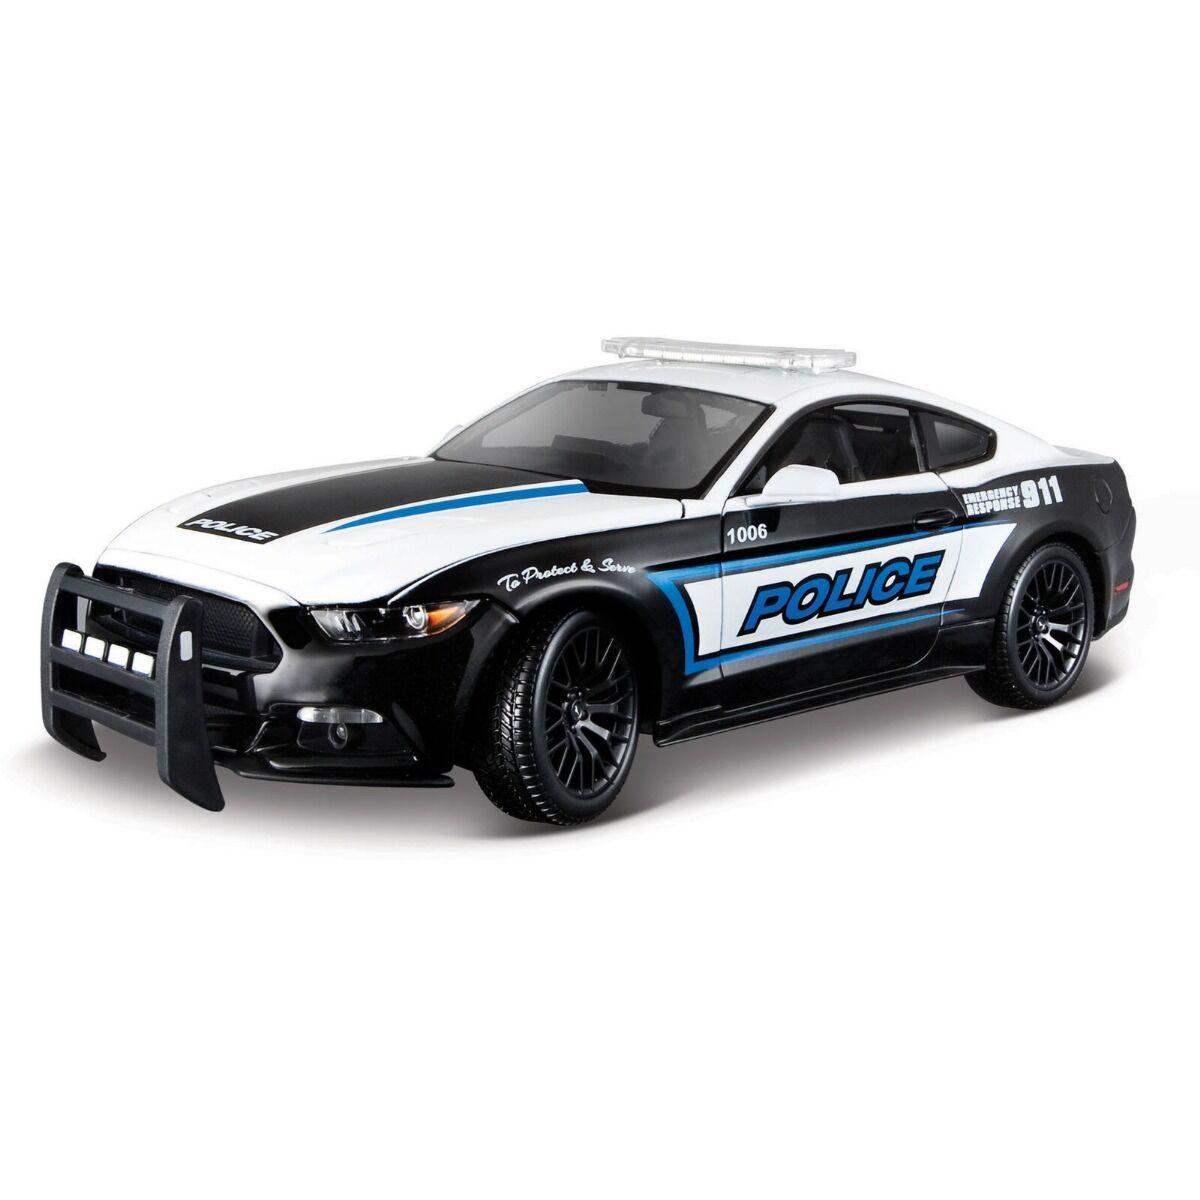 Maisto: 1:18 2015 Ford Mustang GT